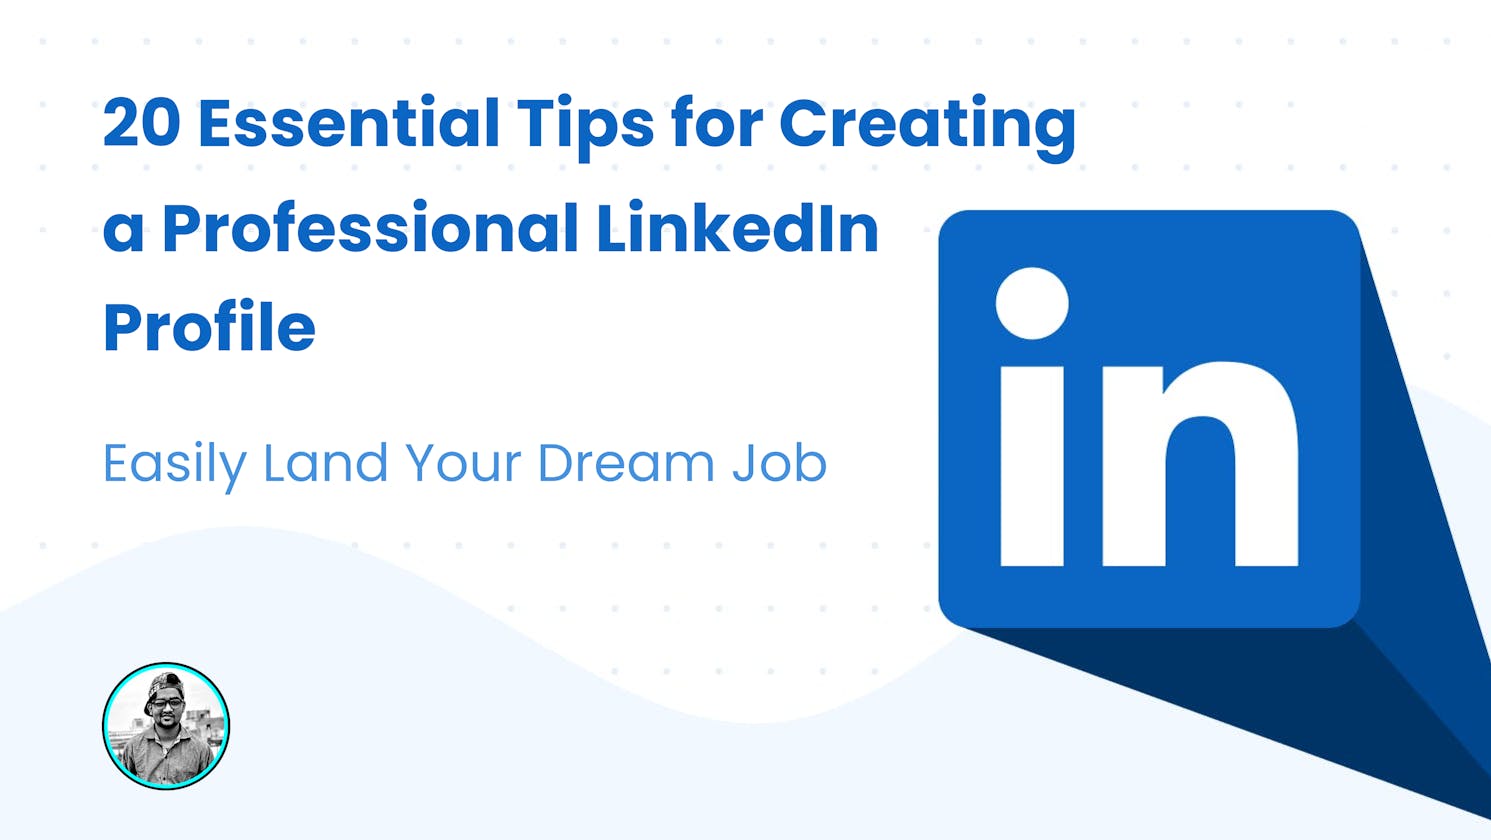 20 Essential Tips for Creating a Professional LinkedIn Profile to Land Your Dream Job